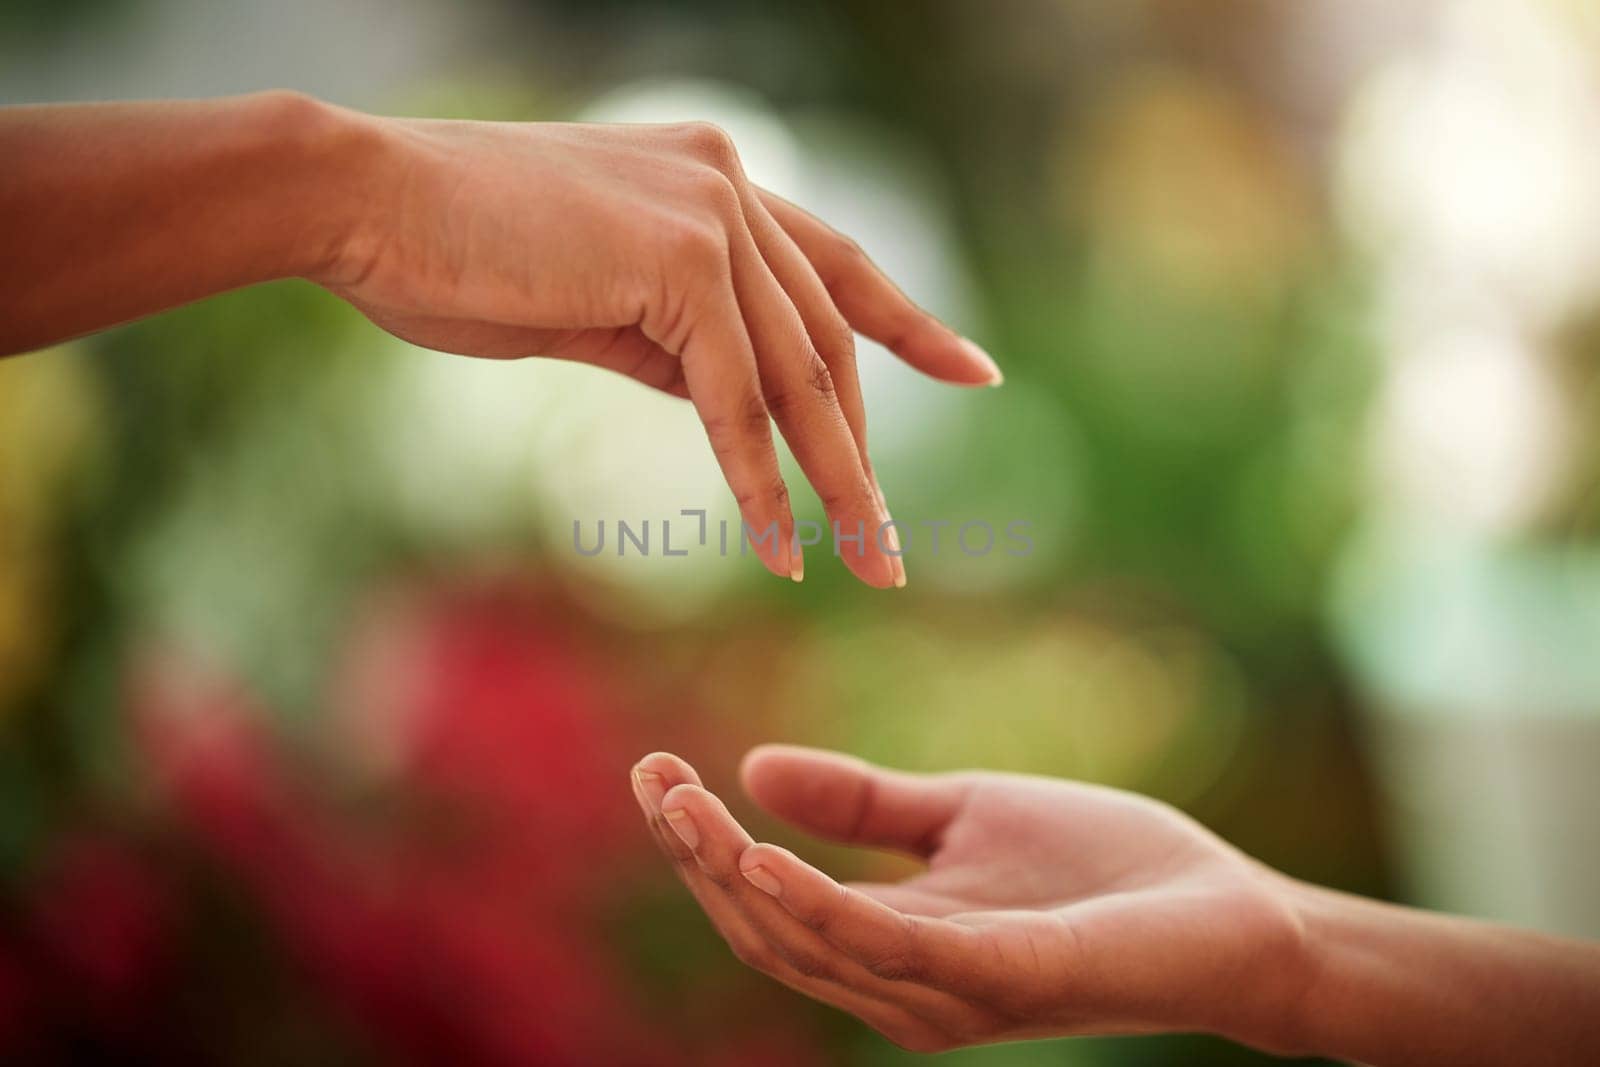 Hands, love and people with a reaching gesture in an outdoor green garden or park in nature. Connection, romantic and closeup zoom of a couple for support, romance or touch together outside